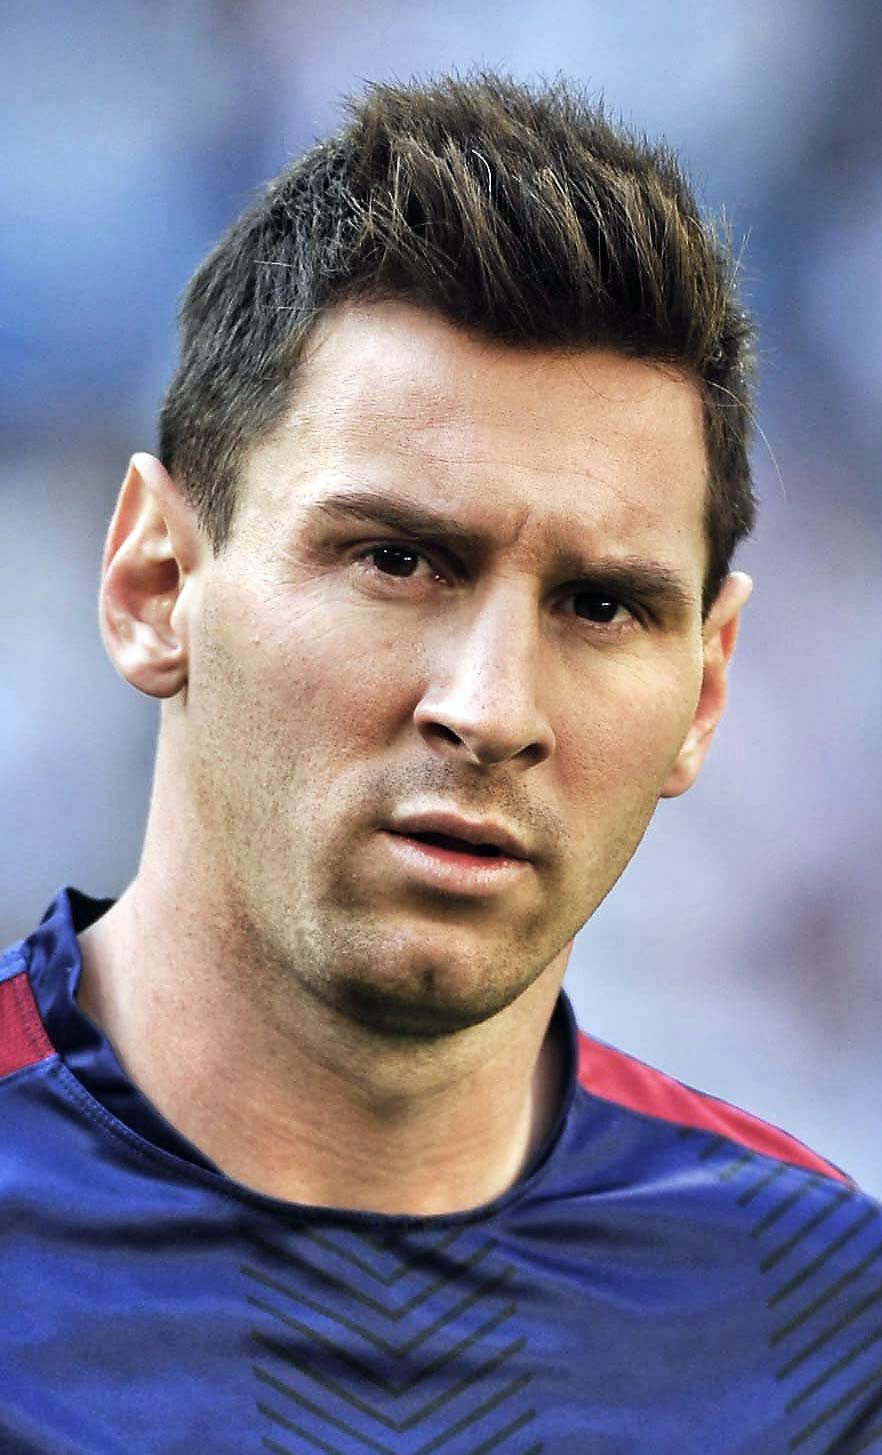 Lionel Messi Has a New Look, But Is Still the Same Dominant Player -  InsideHook